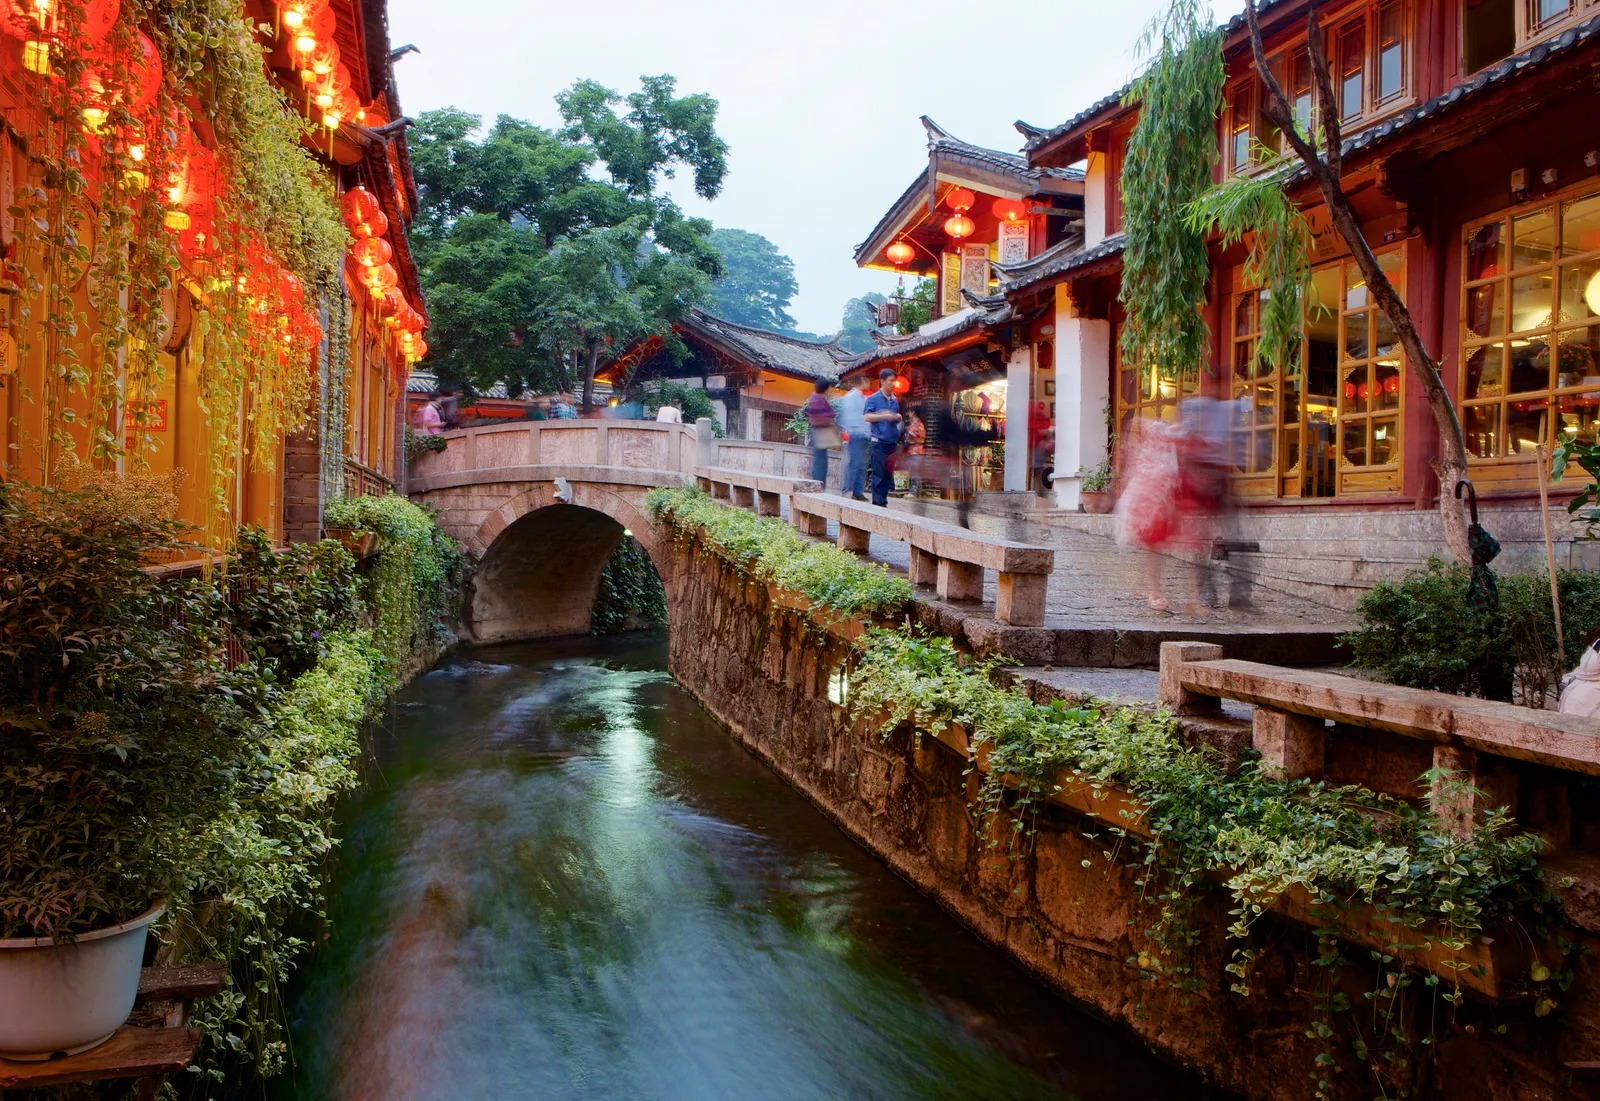 1,000 years old Old Town in Lijiang, China